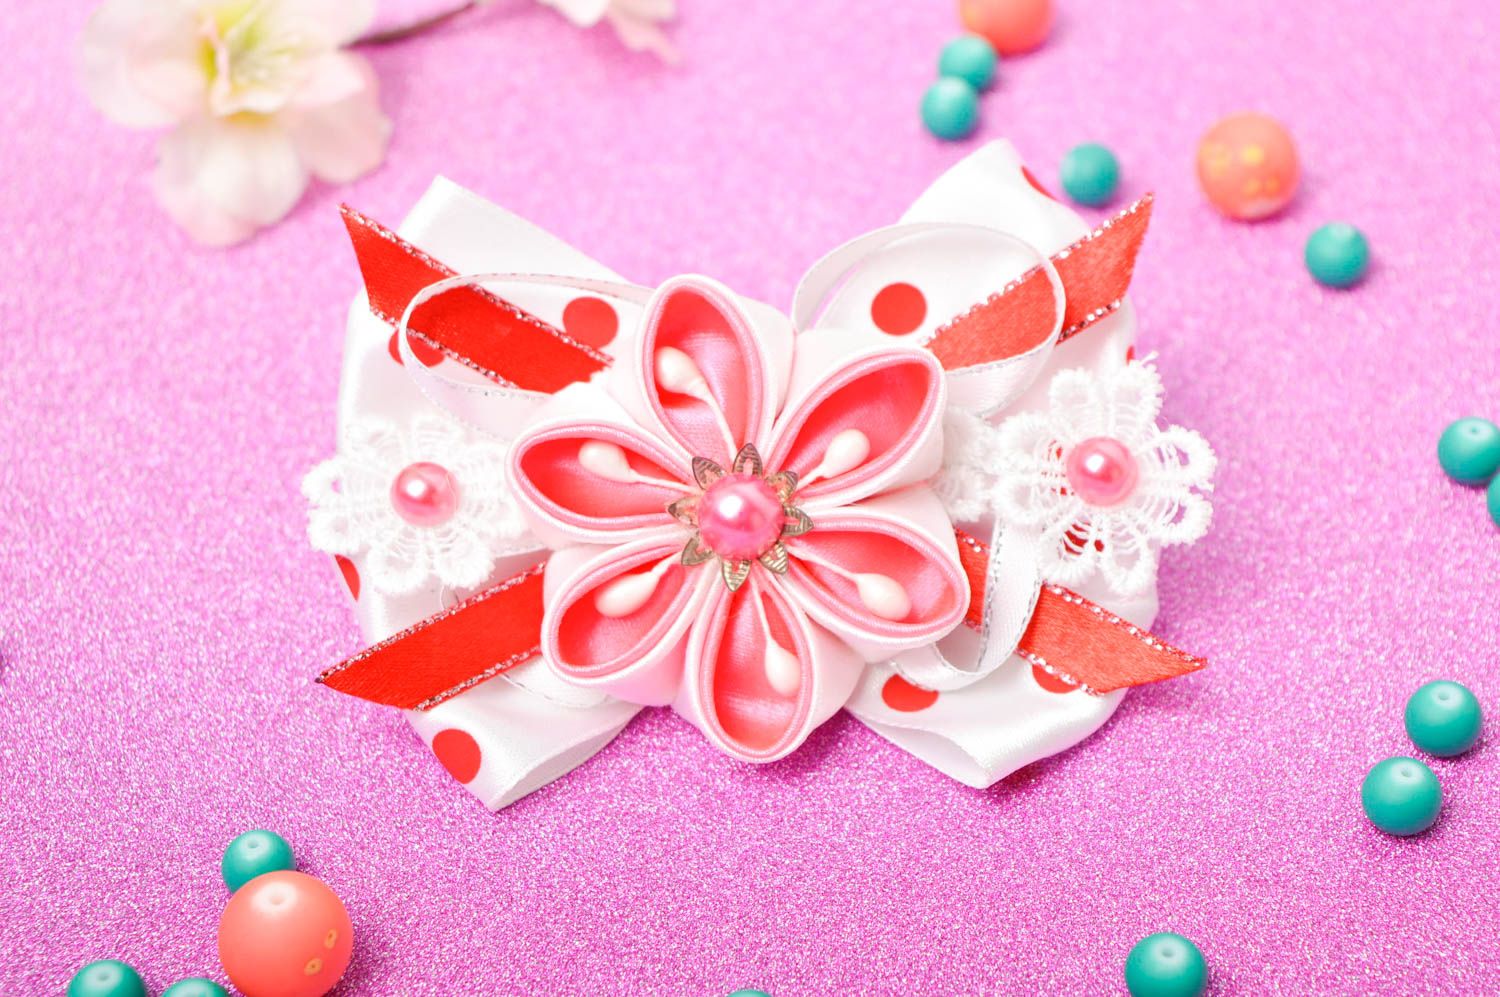 Delicate baby scrunchy handmade hair accessories for children hair ornaments photo 1